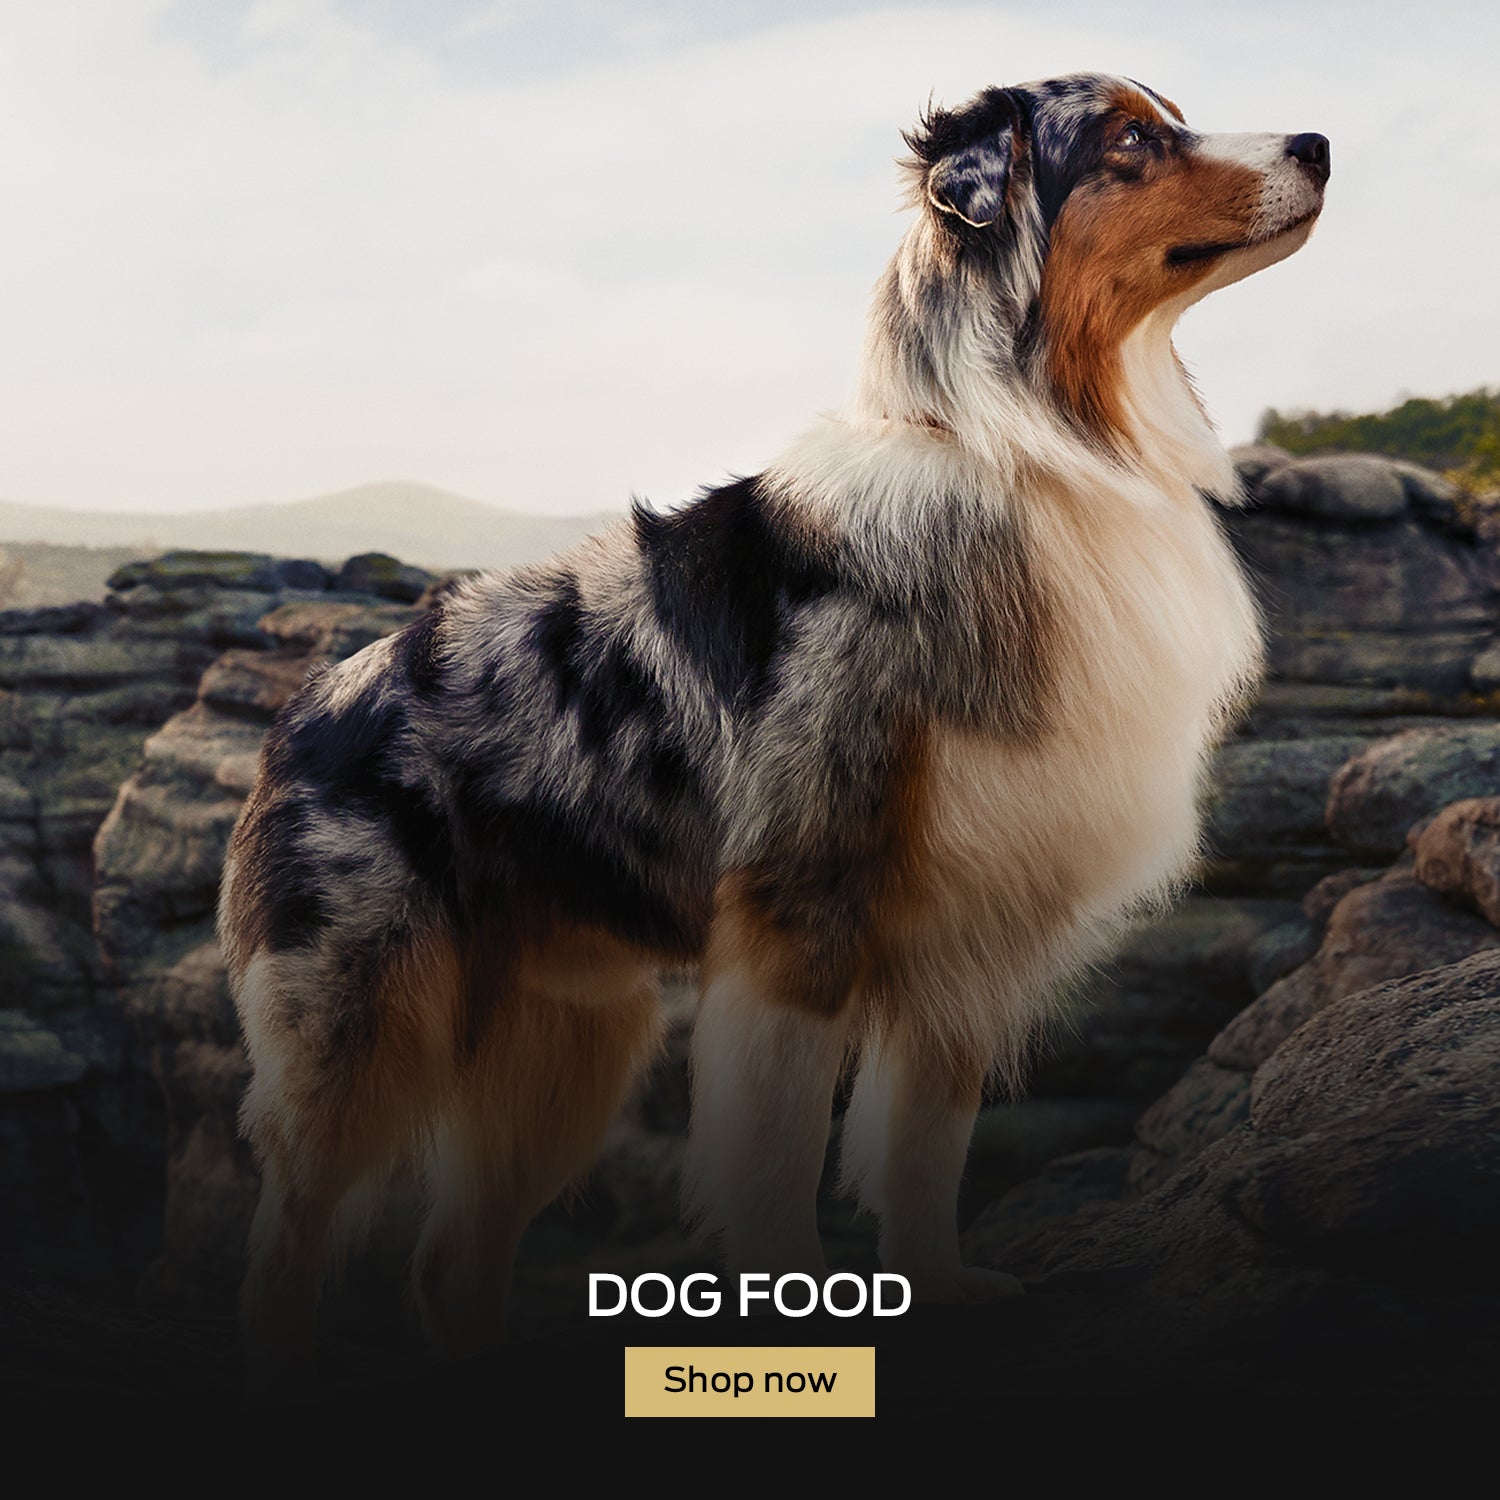 Buy Pro Plan Dog Food Online in Canada at everyday low prices at PetMax.ca